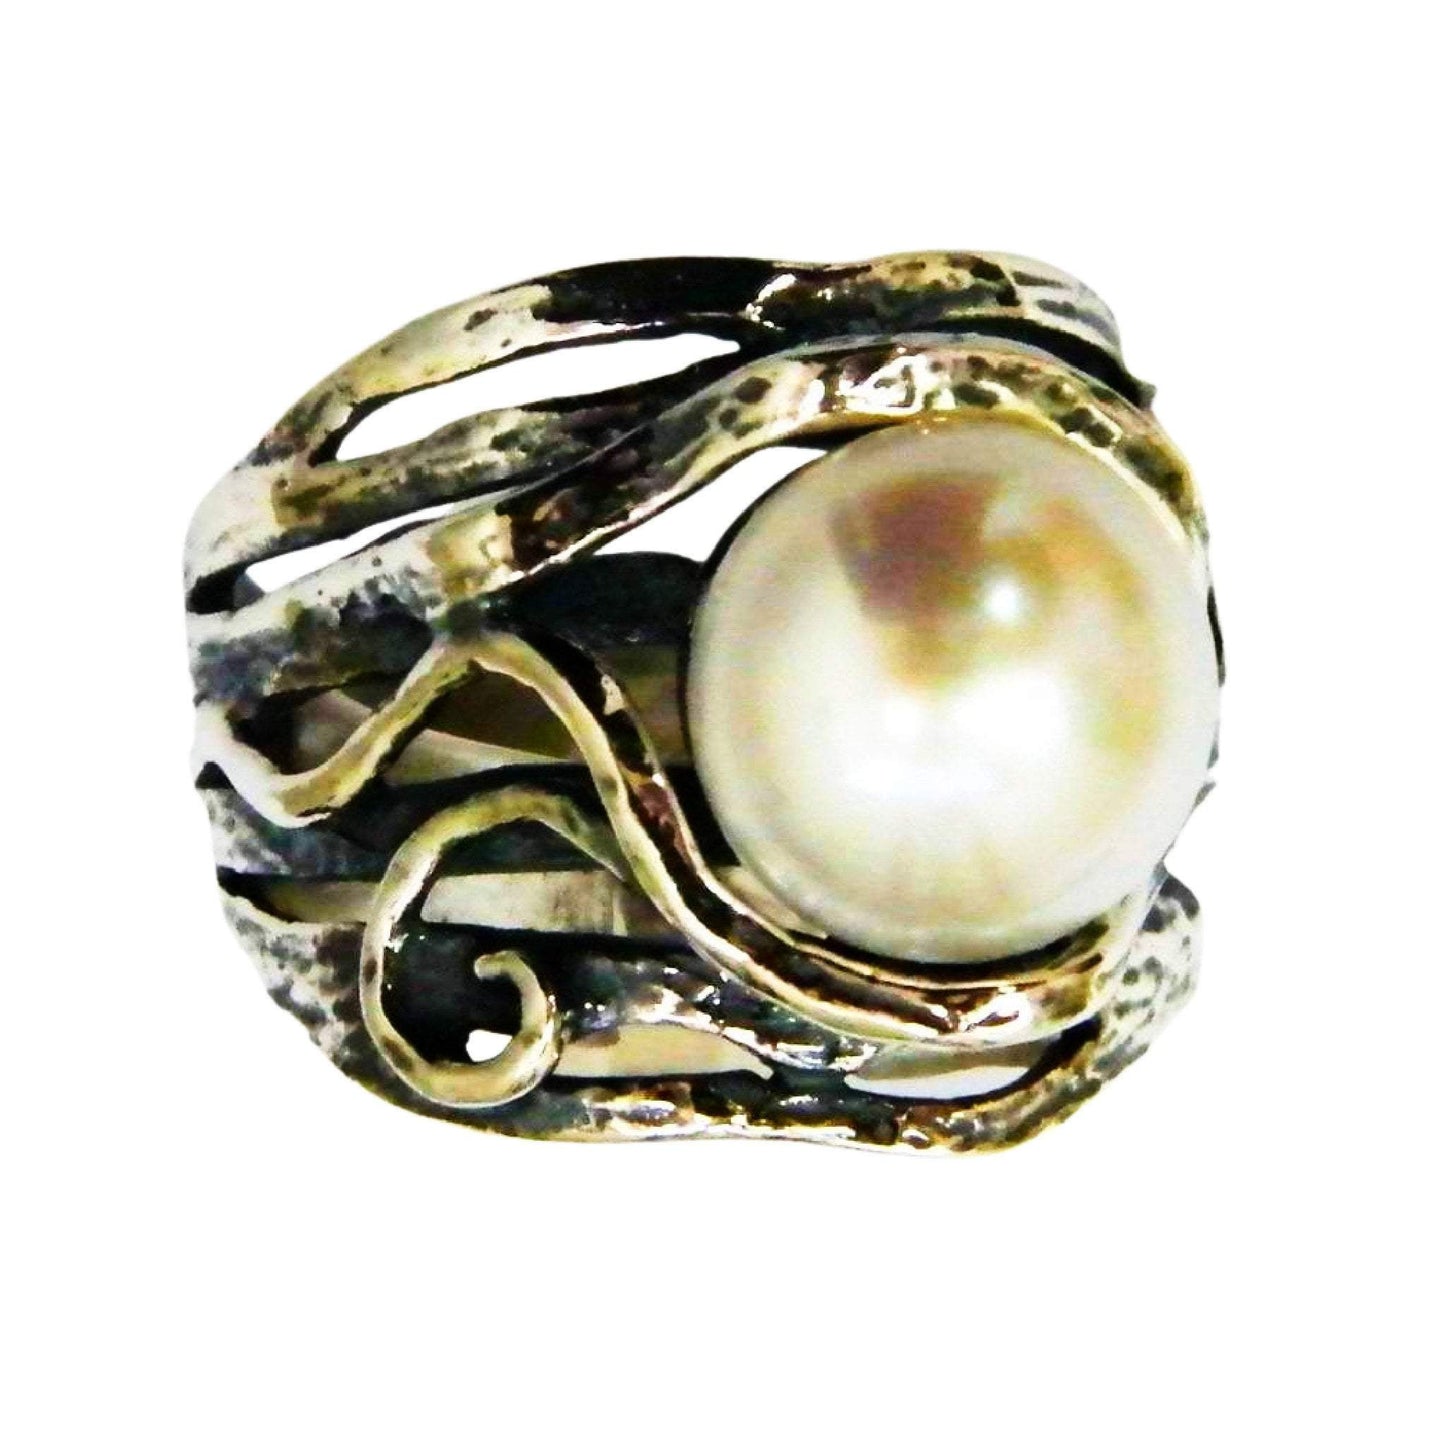 Bluenoemi Jewelry Rings Bluenoemi Jewelry from Israel - Pearl Silver Ring for Woman buying online, silver rings for women